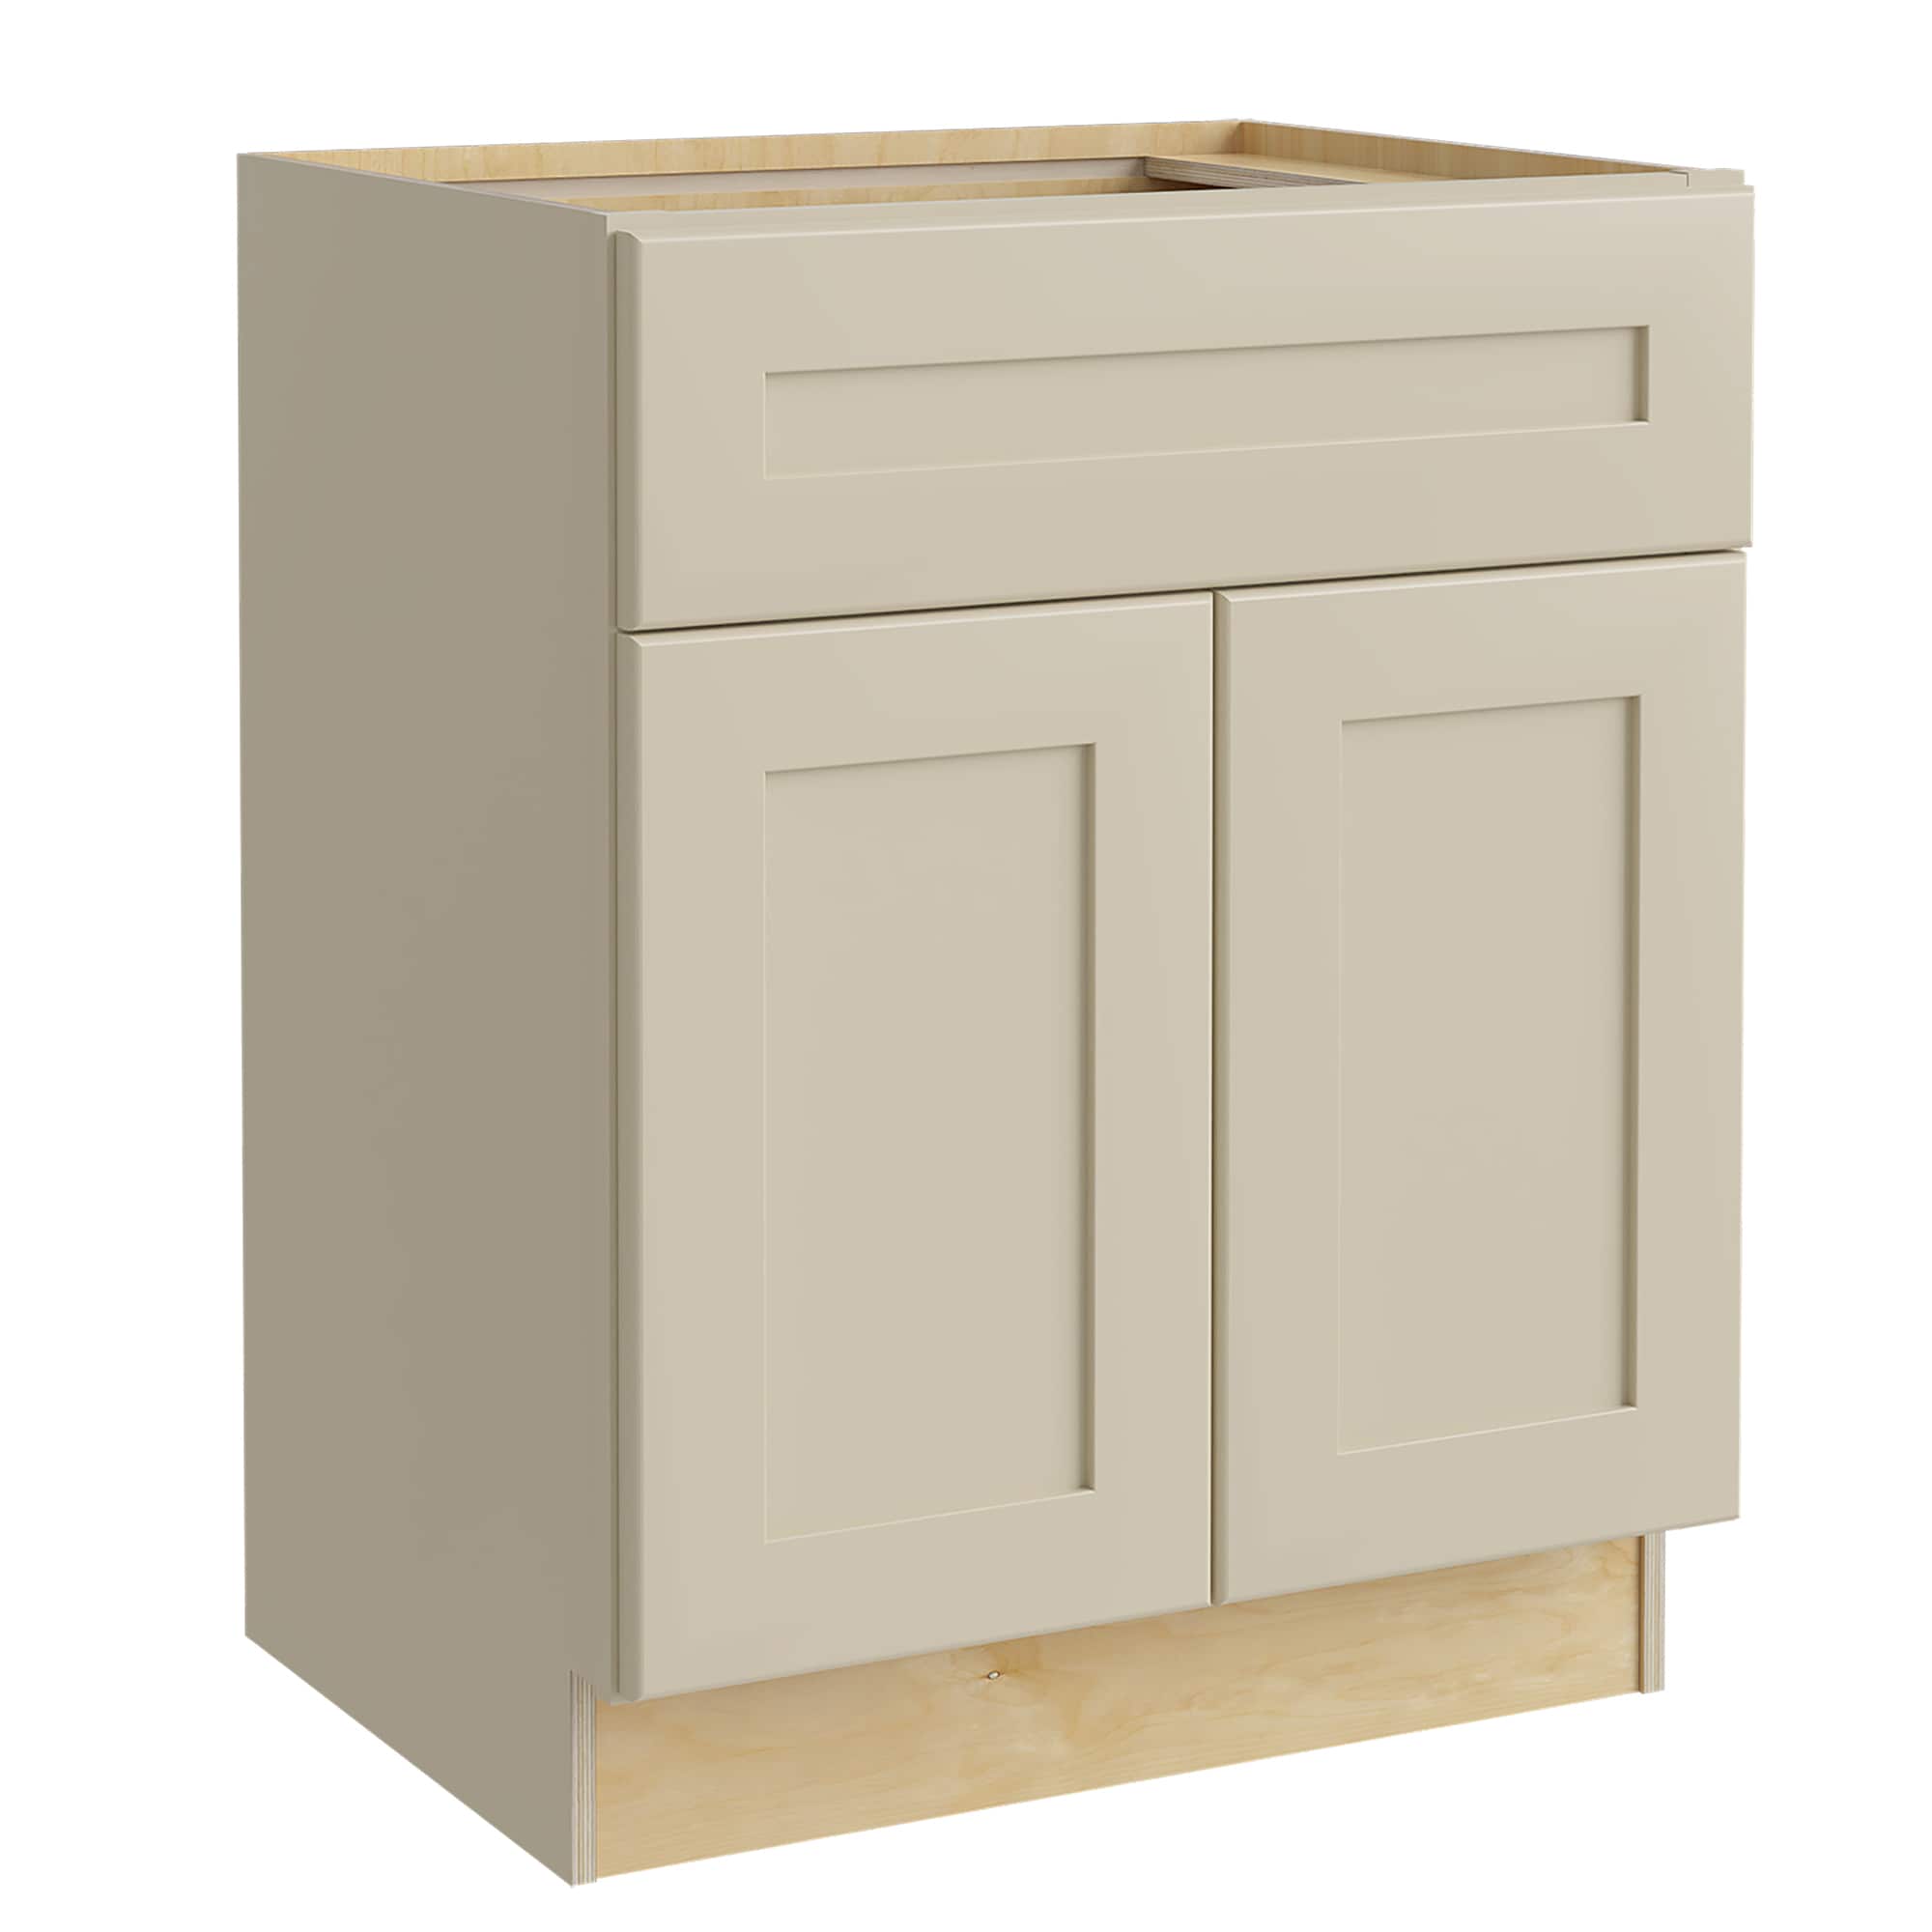 Luxxe Cabinetry 30-in W x 34.5-in H x 21-in D Norfolk Blended Cream Painted Door and Drawer Base Fully Assembled Semi-custom Cabinet in Off-White